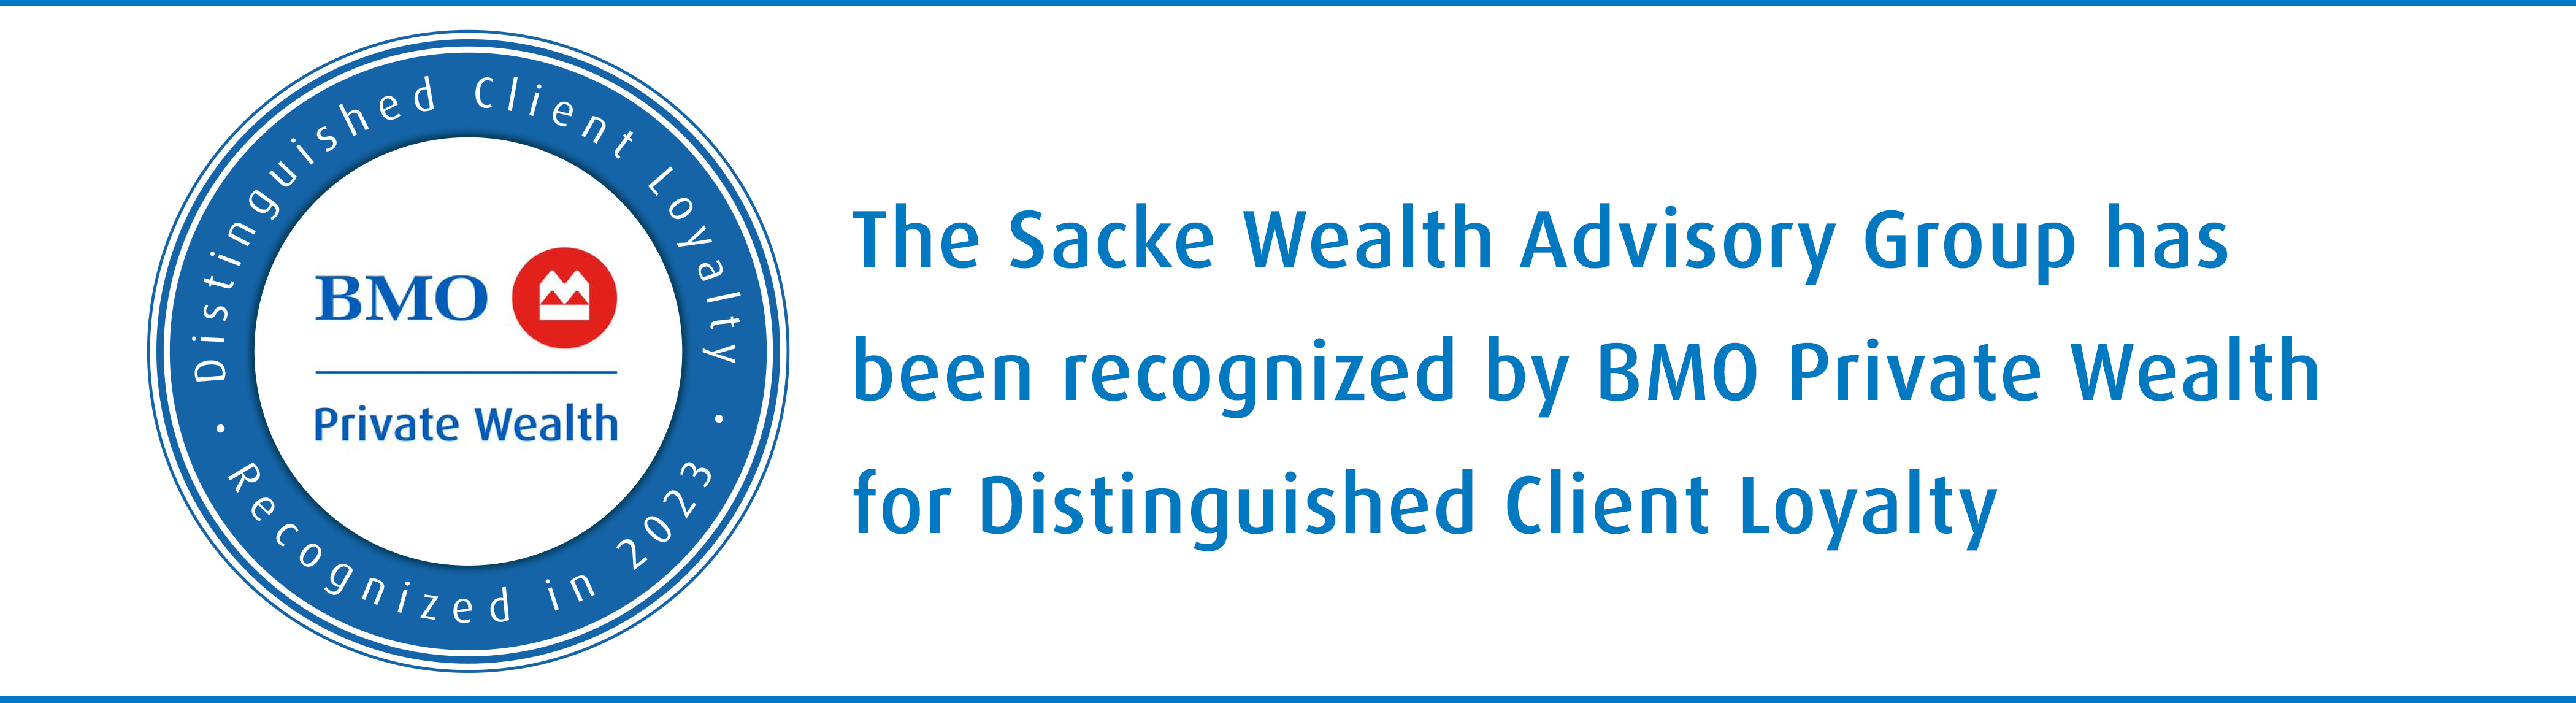 Recognized by BMO Private Wealth